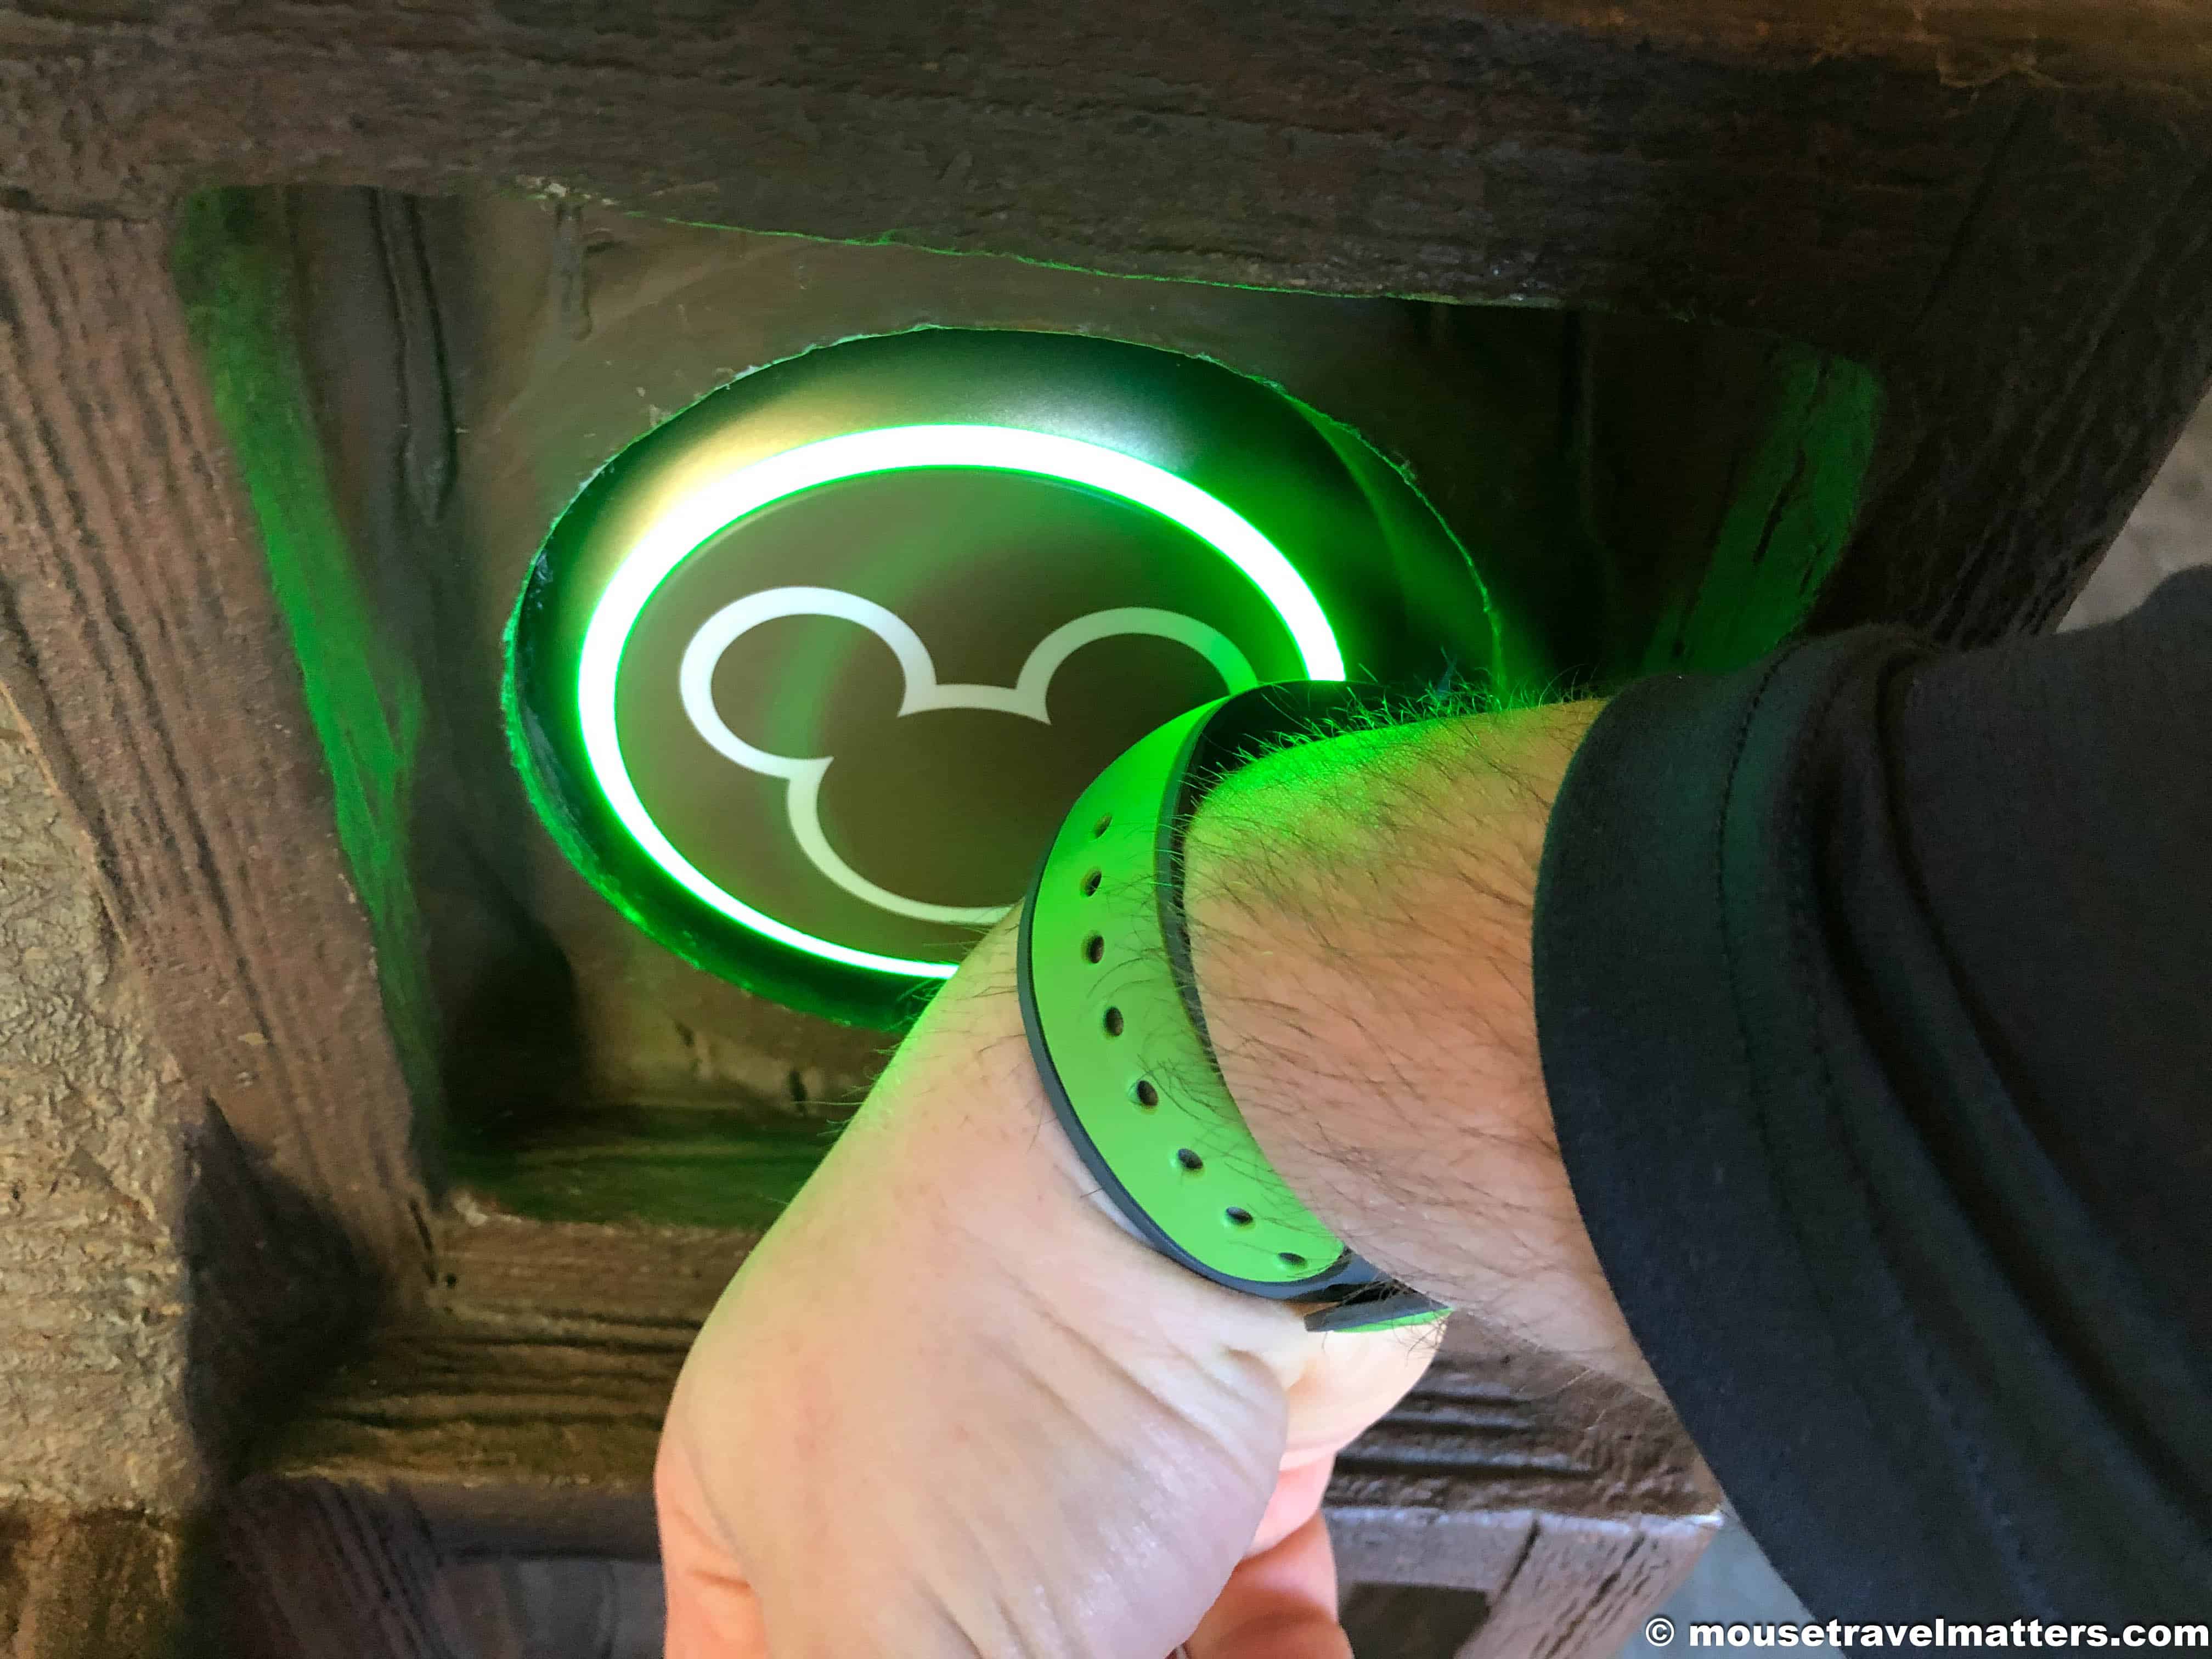 Everything you need to know about MagicBands at Walt Disney World! Tips for getting and using Magic Bands and a peek at the new MagicBand 2.0. Disney World planning tips for your family vacation